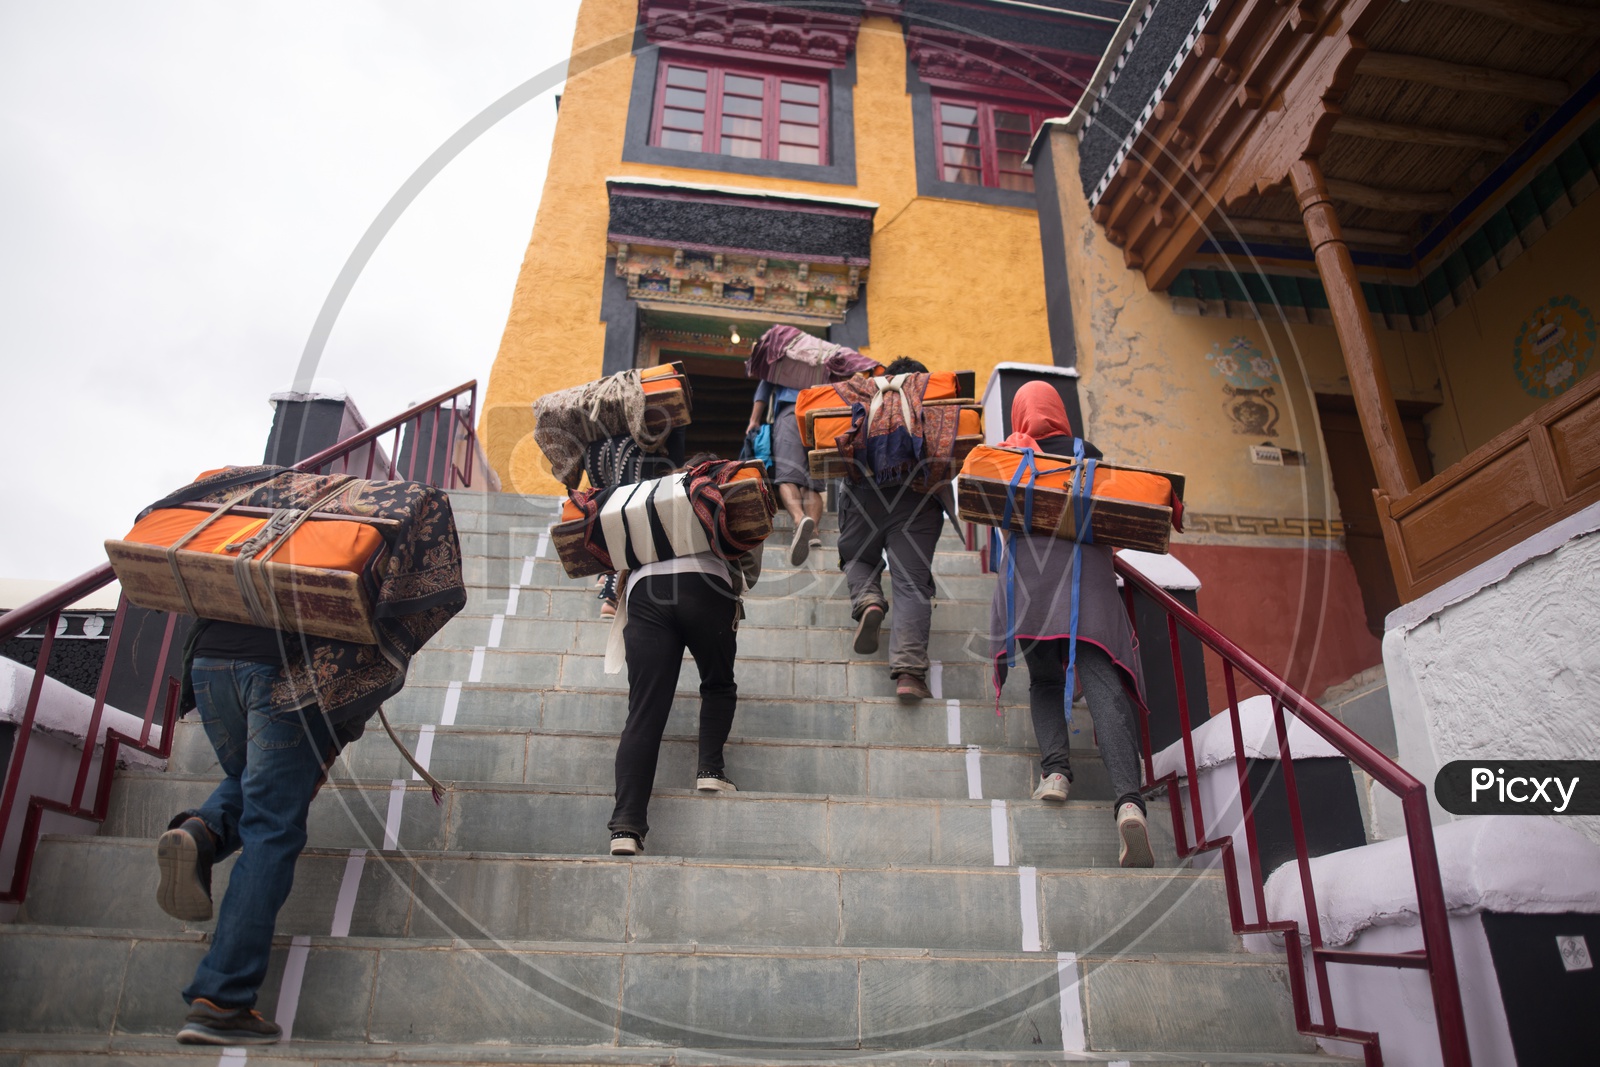 People carrying bags to the monastery